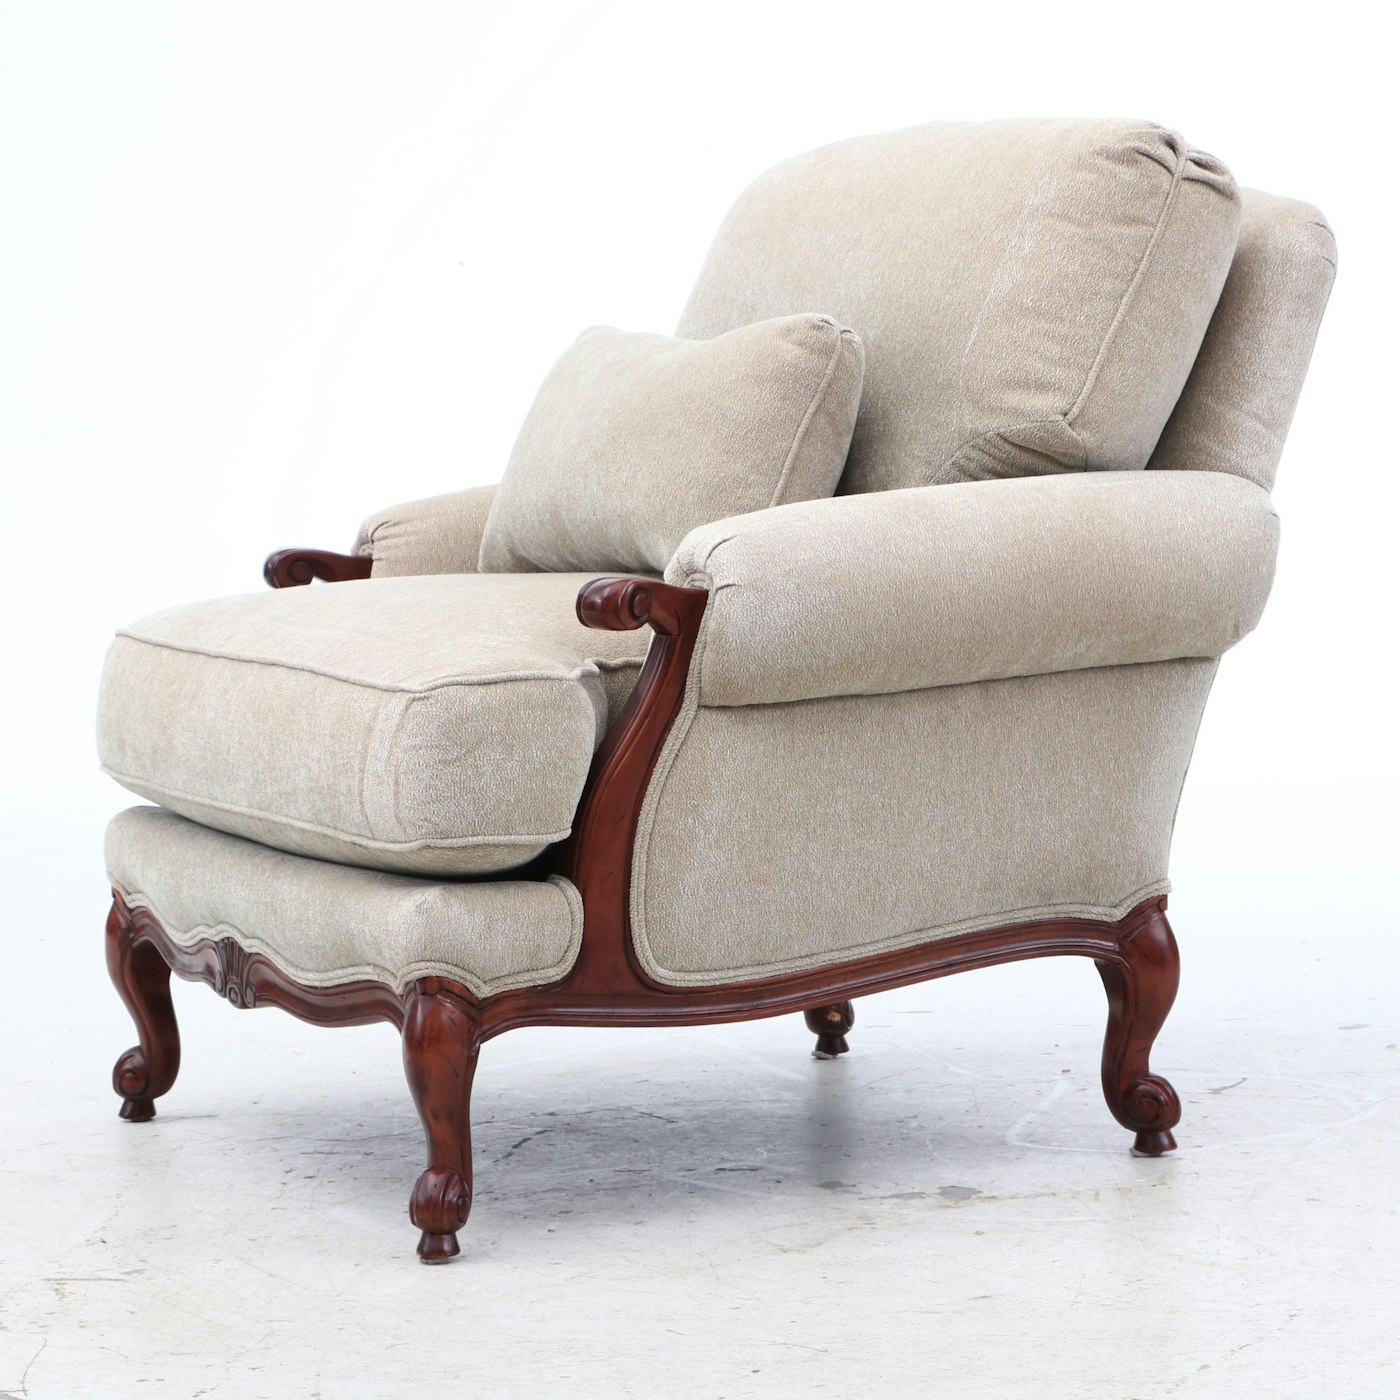 Thomasville Upholstered Arm Chair with Ottoman | EBTH